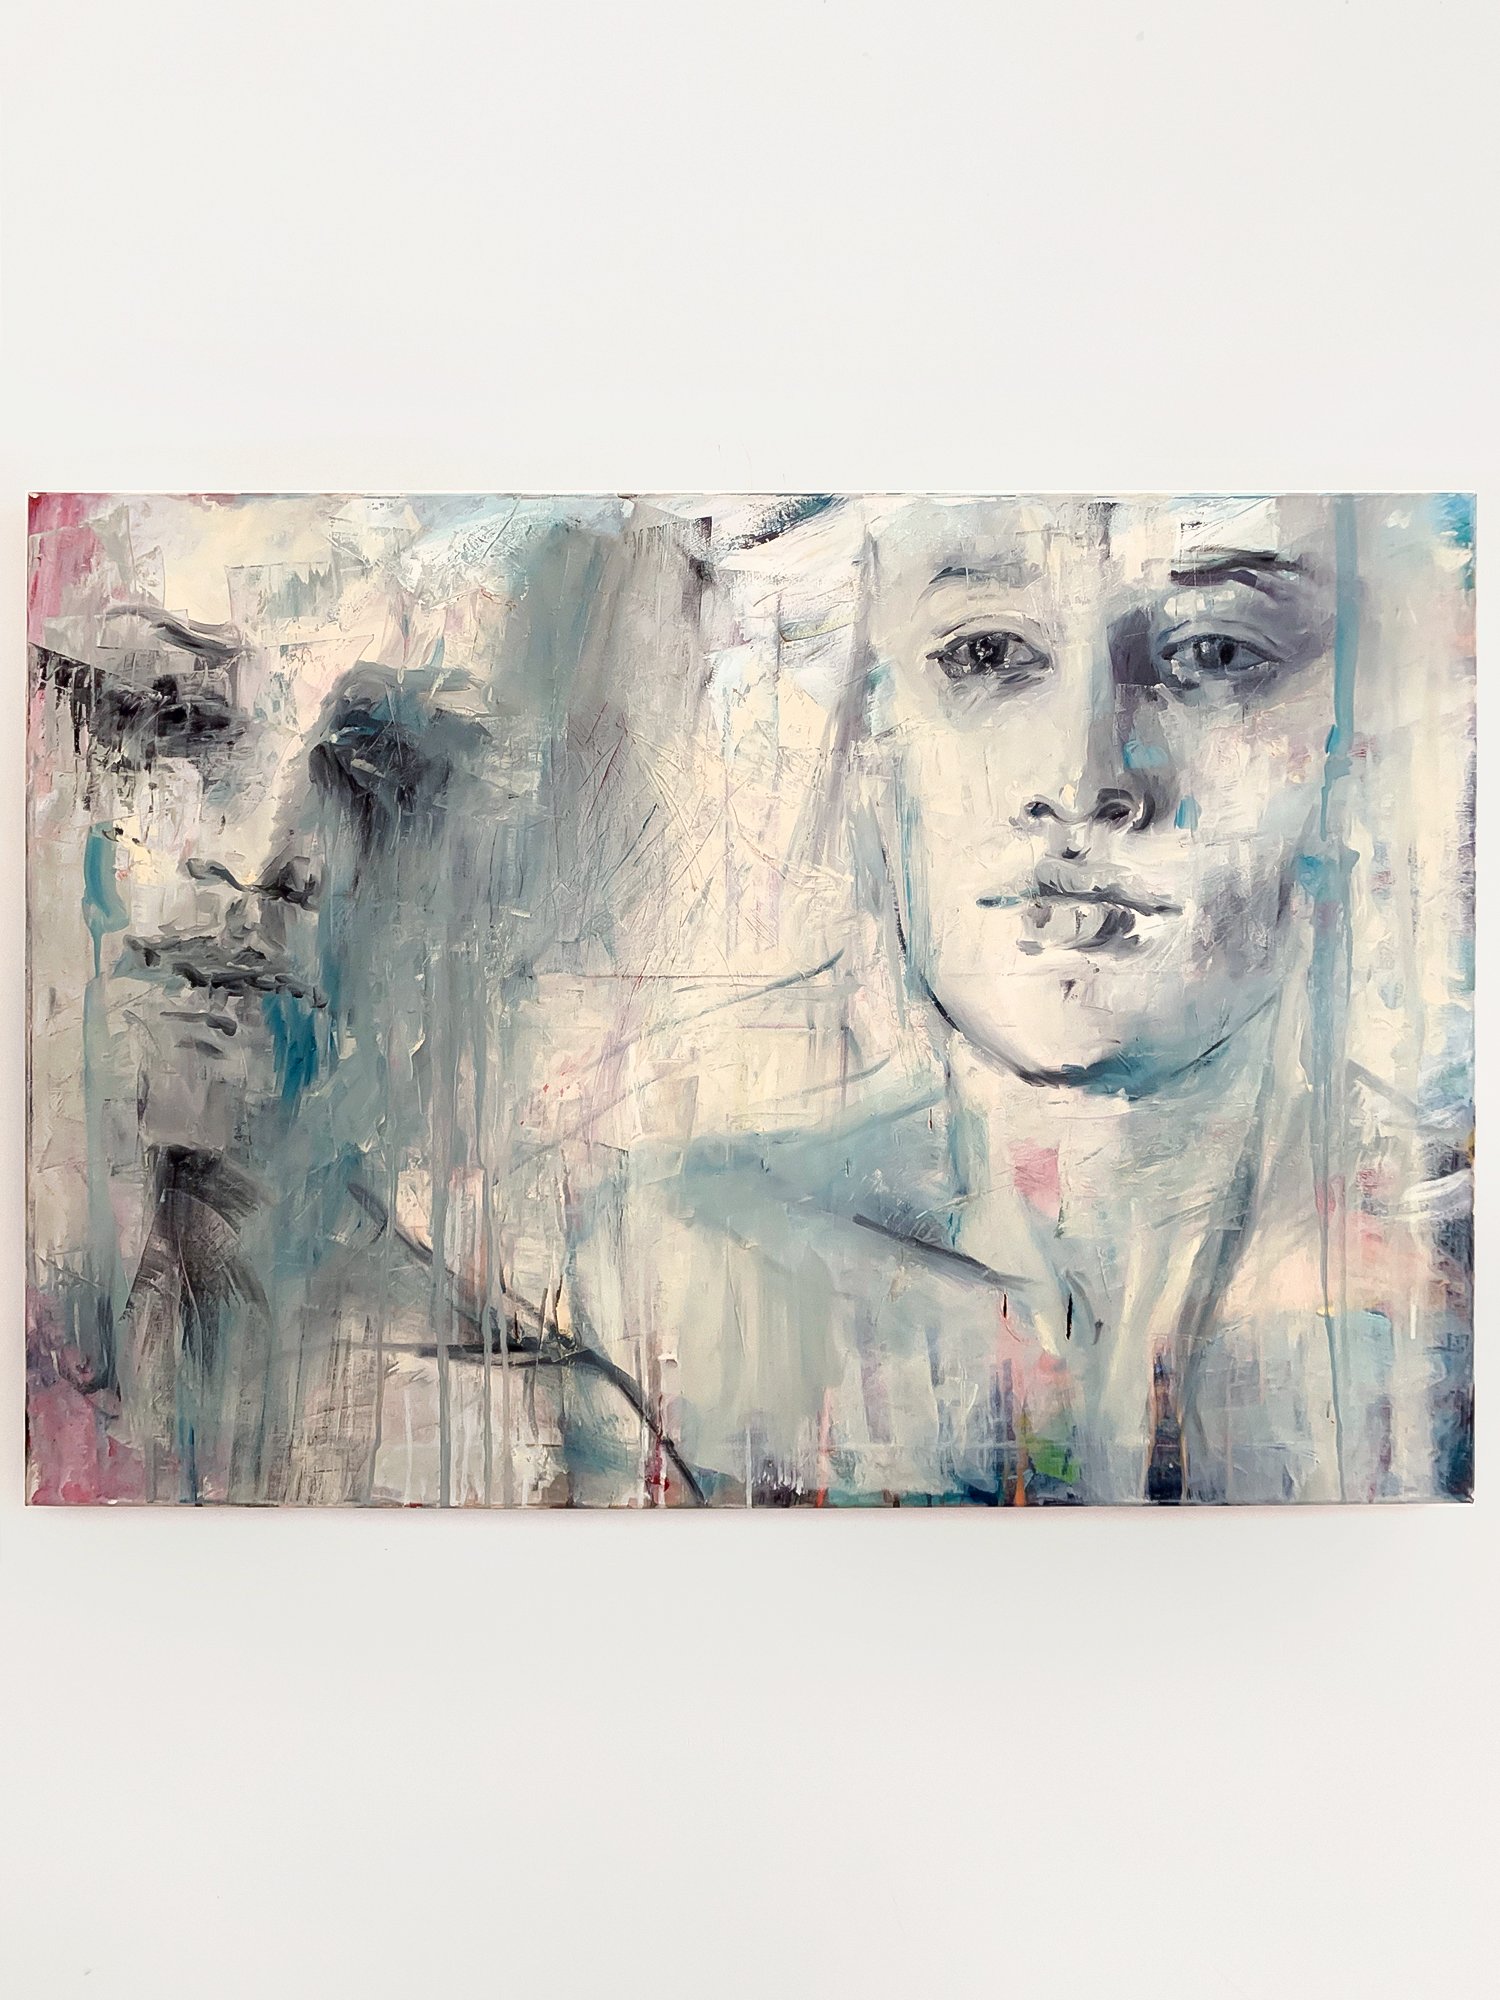 Agnes-Cecile our great love story (100x70 cm)